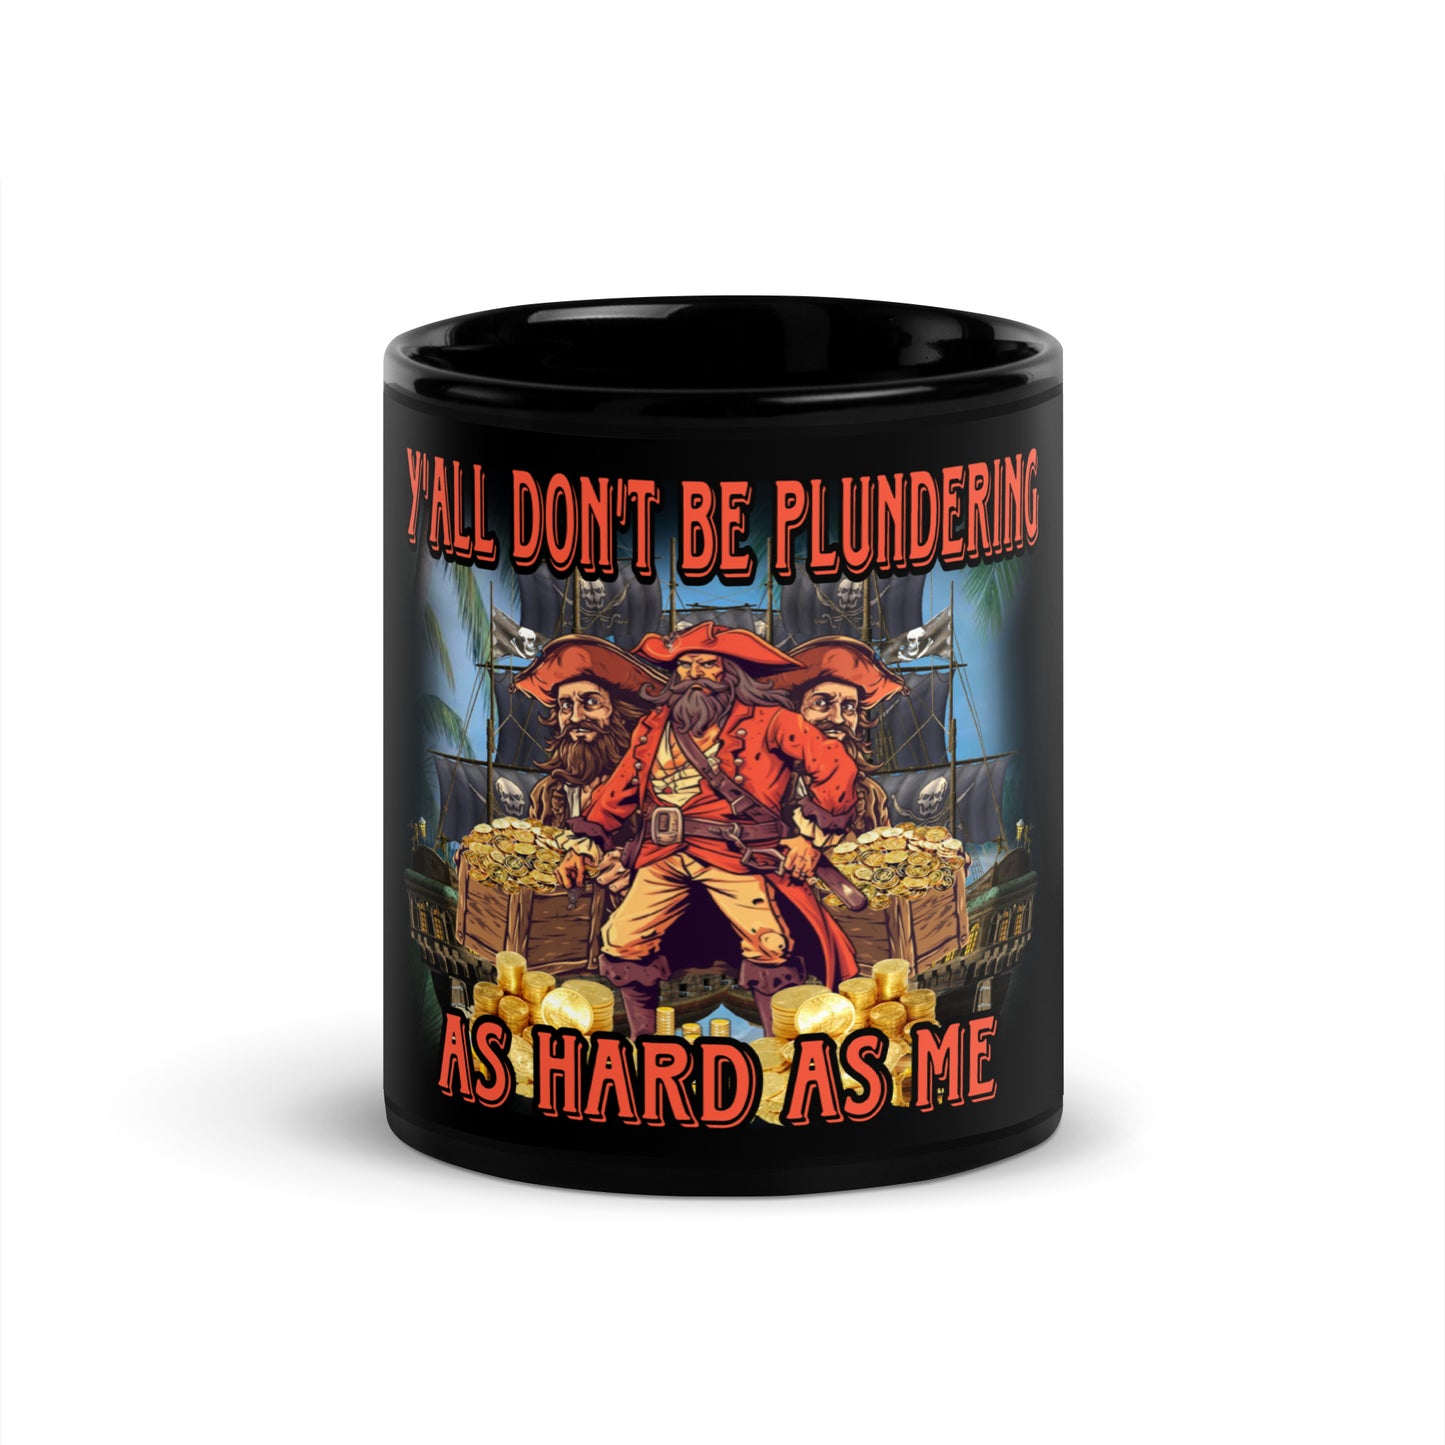 Y’all don’t be plundering as hard as me mug